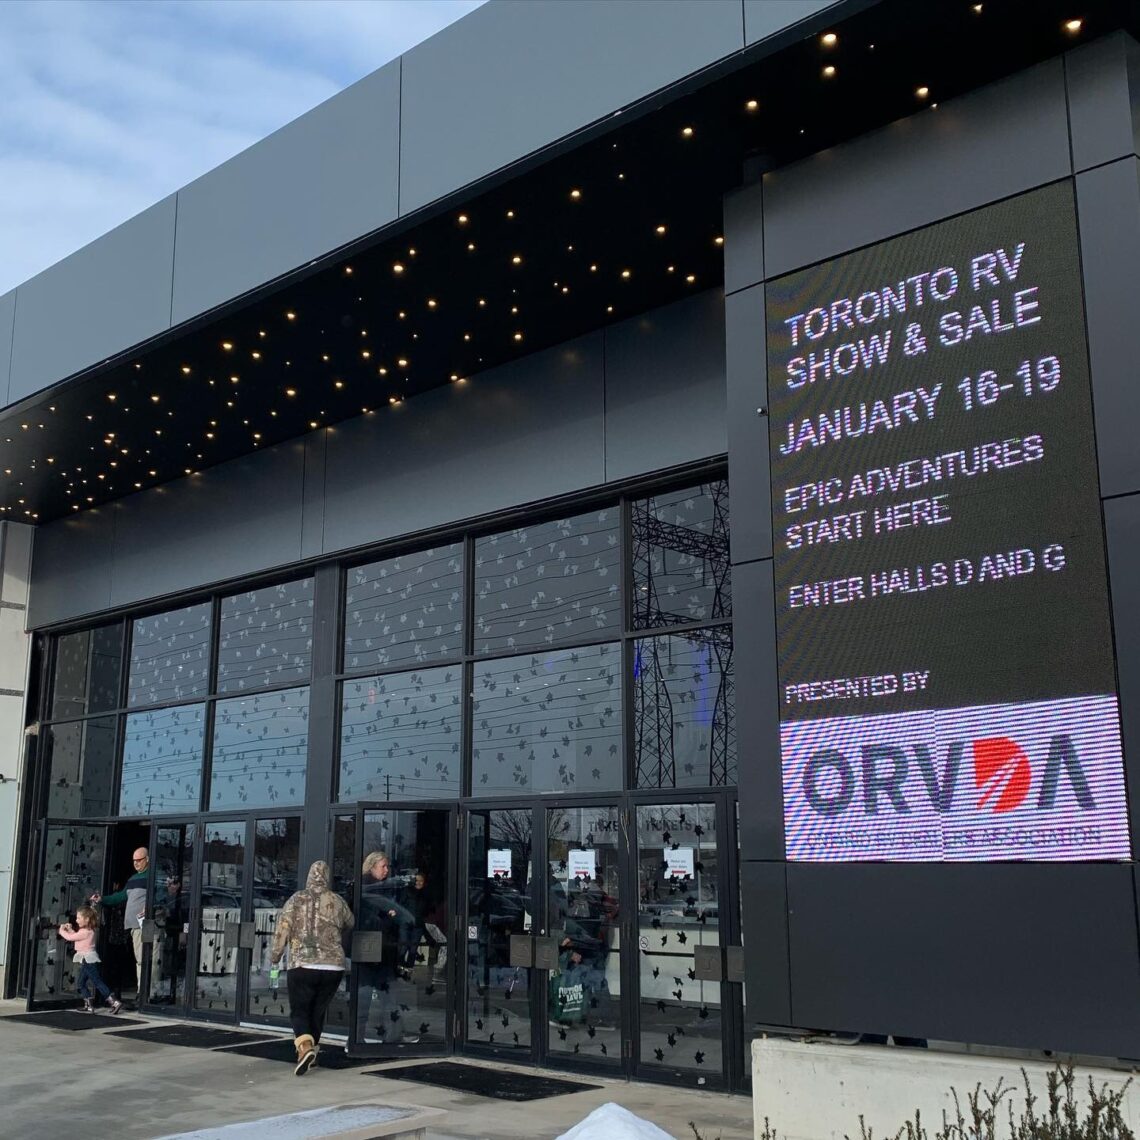 The entrance to the 2020 Toronto RV Show and Sale